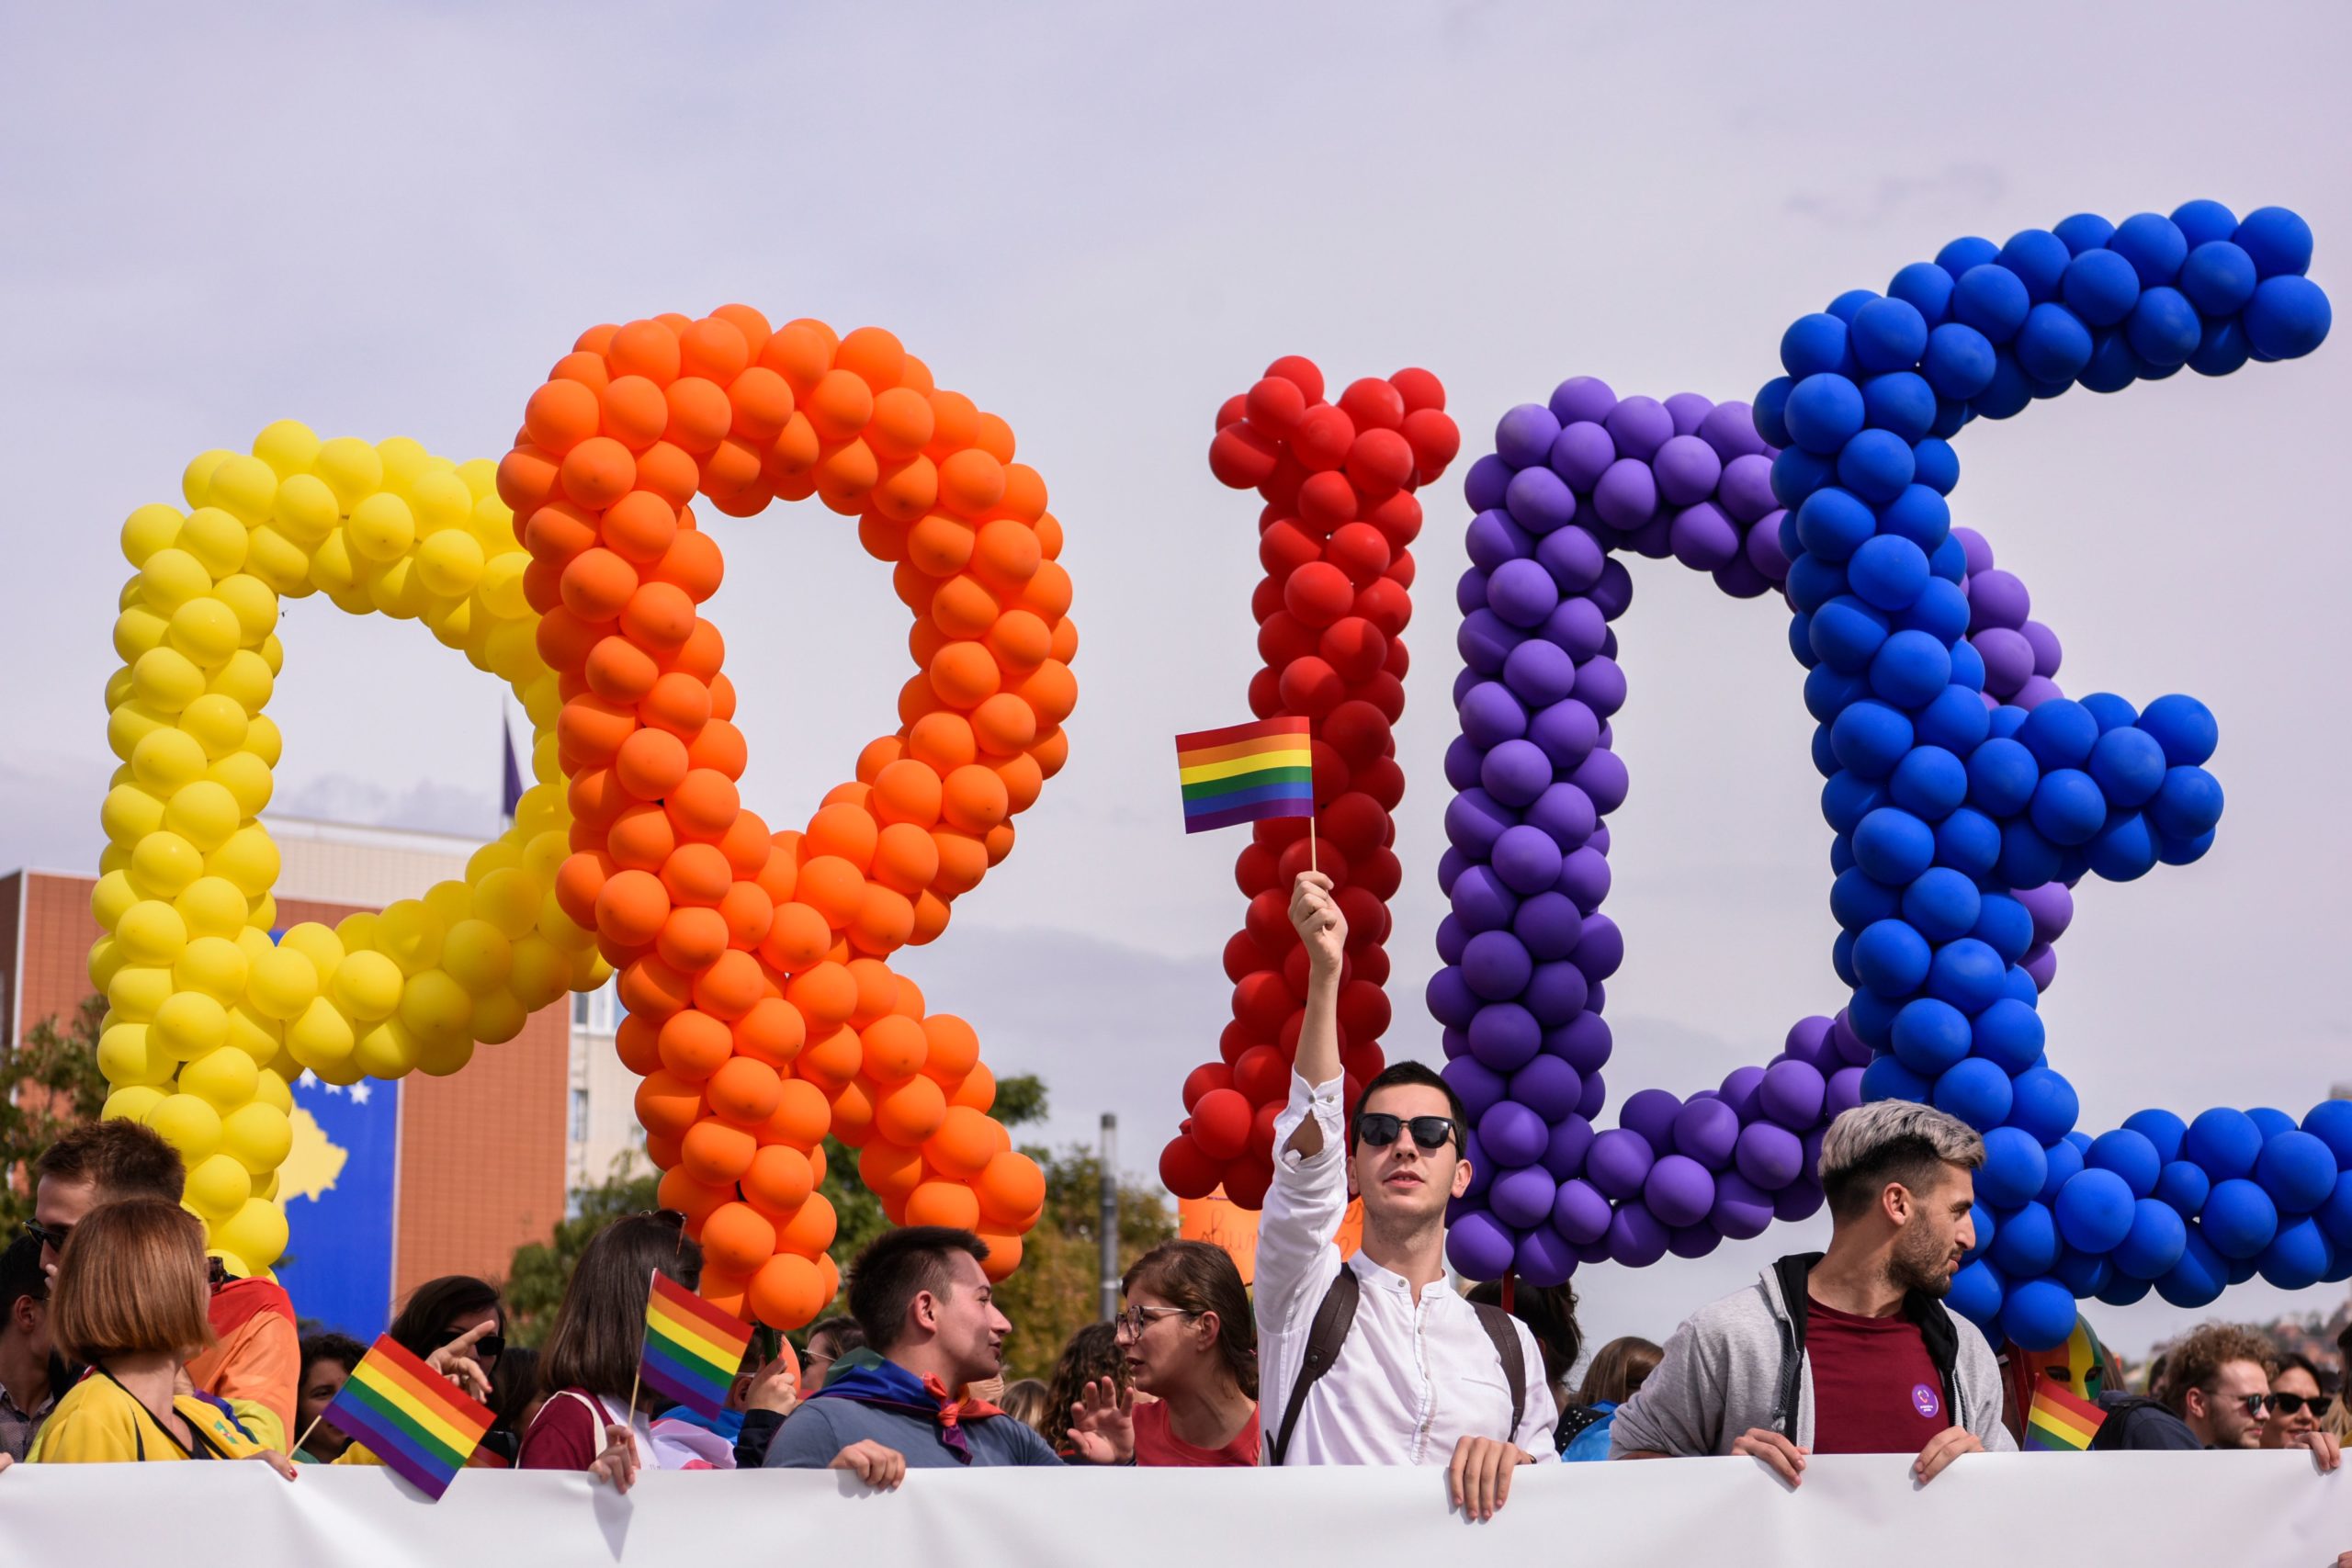 People hold balloons forming the word "Pride" during the Gay Pride parade in Pristina on October 10, 2019. - Hundreds of Kosovo people marched along the main street during a Gay parade demanding "freedom" and "equal rights" in the patriarchal and Muslim majority country with little tolerant views on sexuality. (Photo by Armend Nimani/AFP via Getty Images)